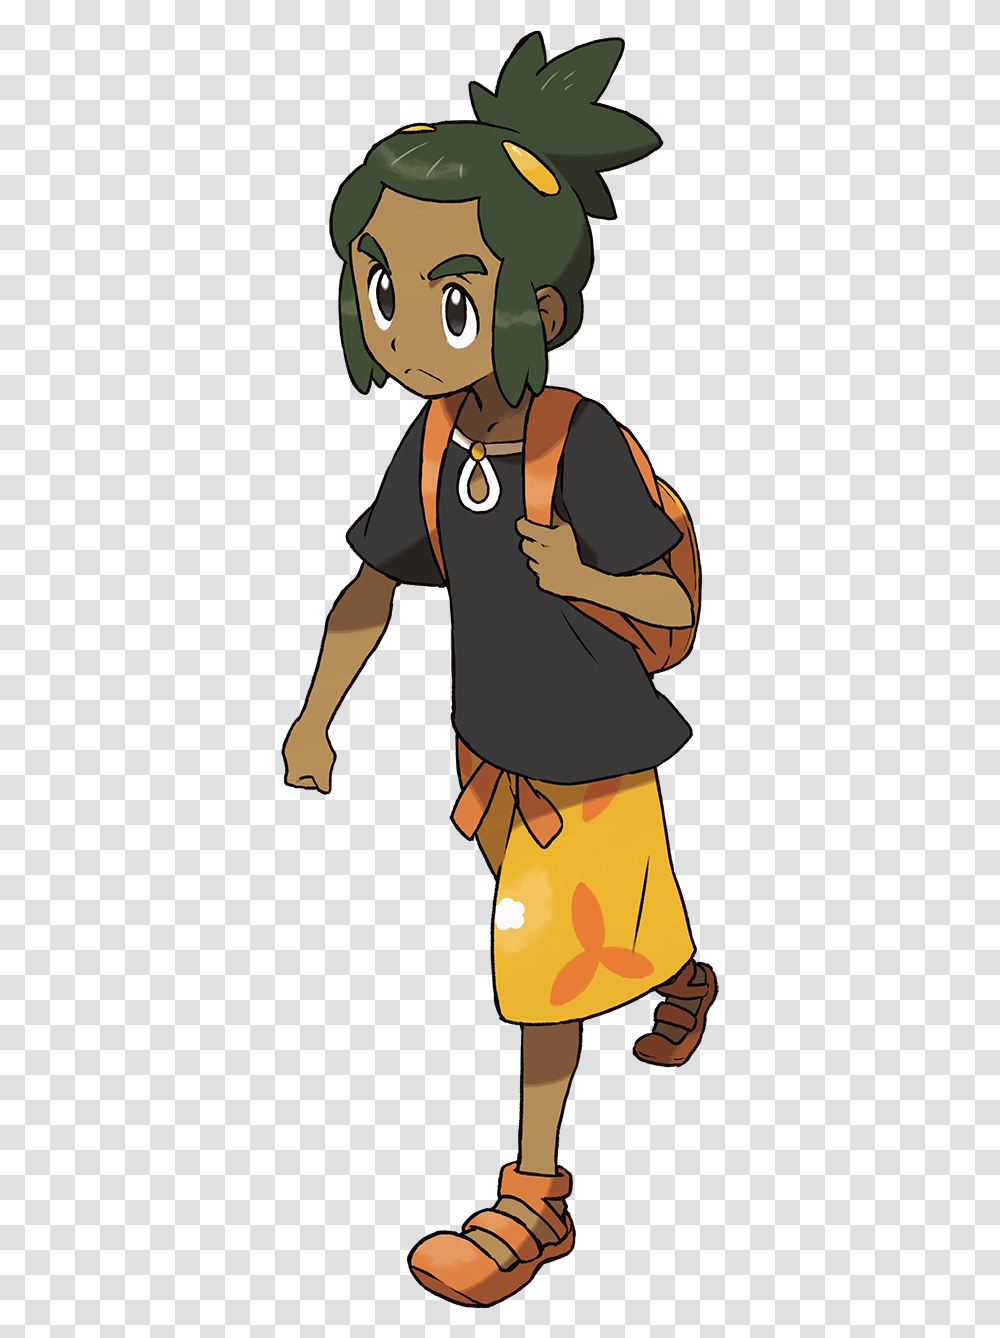 Pokemon Sun & Moon Characters Pokeshopper Hau Sun And Moon, Clothing, Person, Sleeve, Accessories Transparent Png